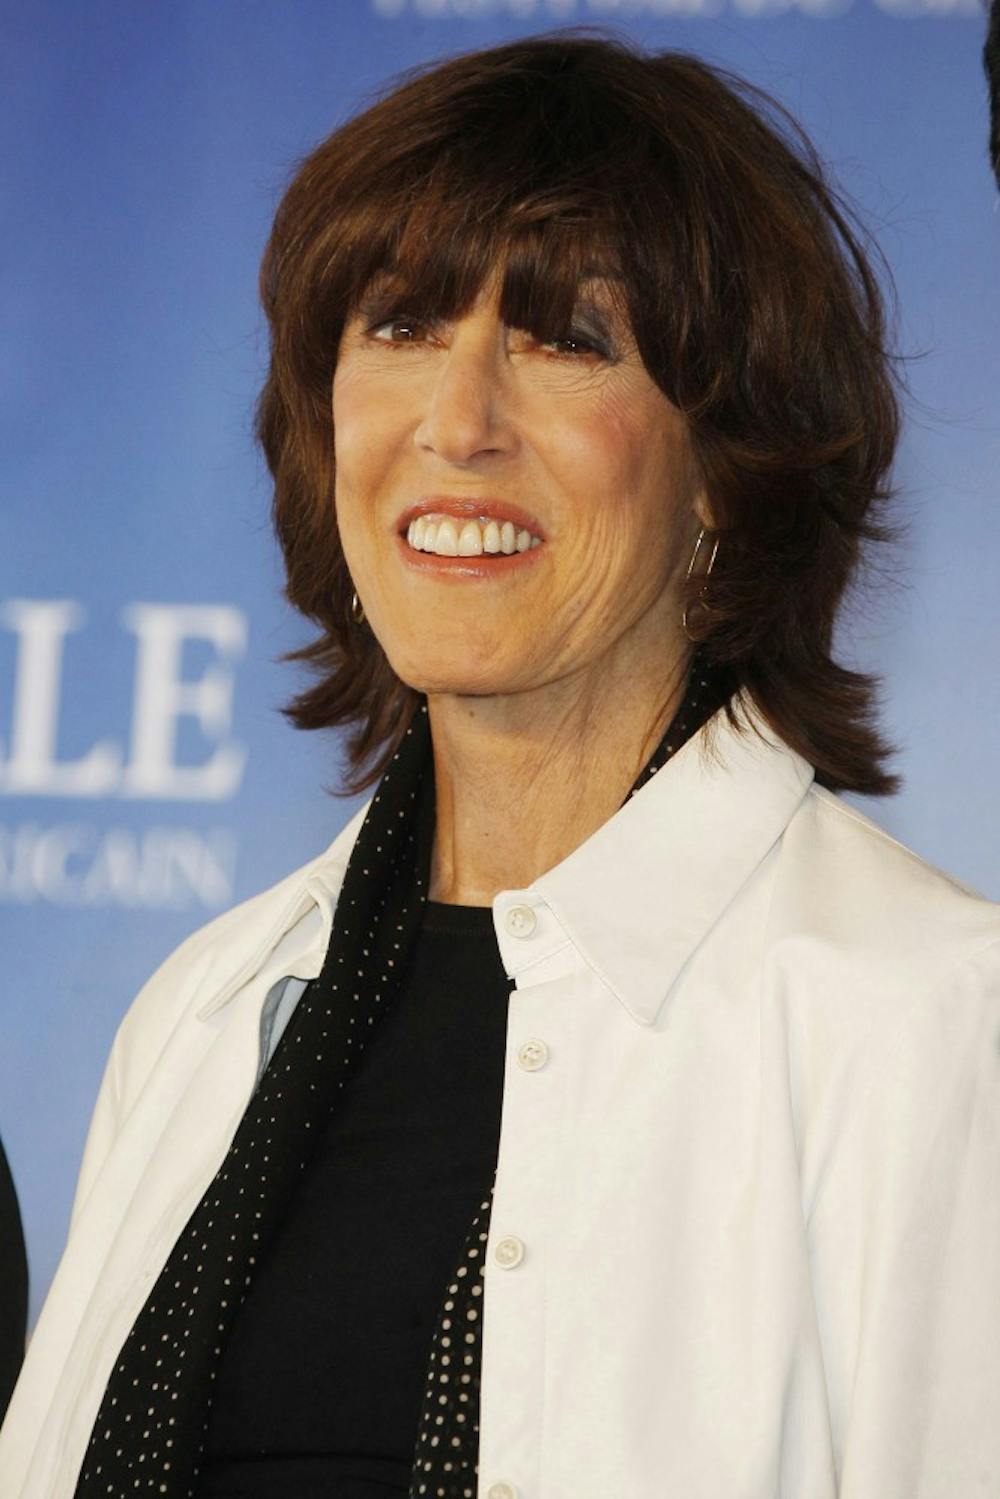 Director Nora Ephron, seen in this file photo from September 2009, died June 26, 2012, in New York. She was 71. Ephron's hit movies included: "Sleepless in Seattle," "When Harry Met Sally," and "Julie & Julia." (Denis Guignebourg/Abaca Press/MCT)